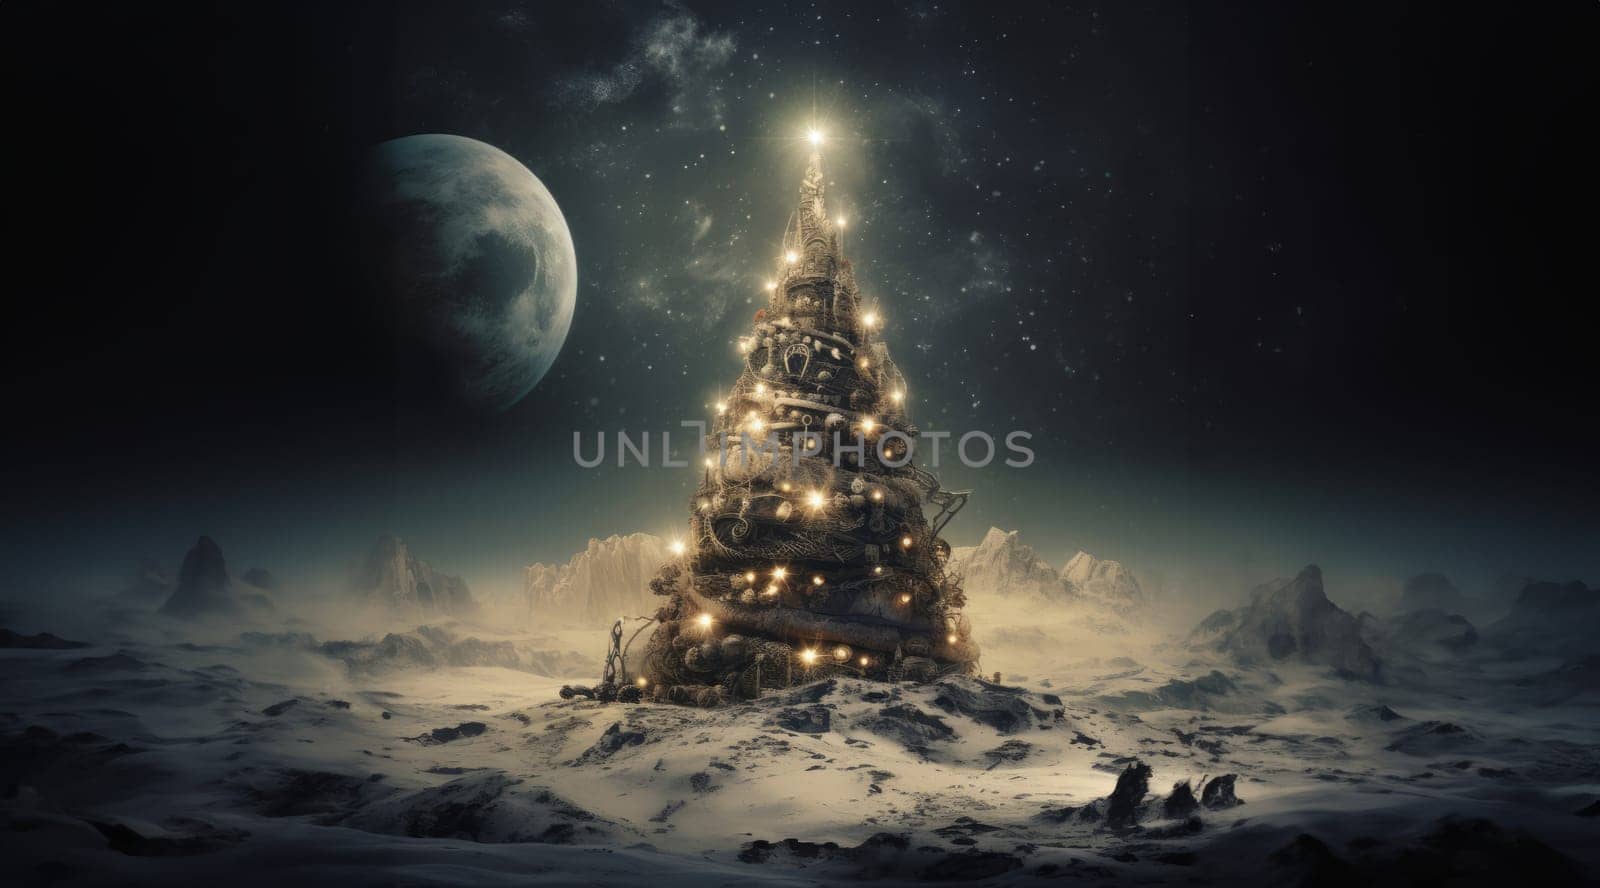 An astronaut on Mars celebrates the holiday season by decorating a Christmas tree, bringing a festive spirit to the distant red planet.Generated image by dotshock